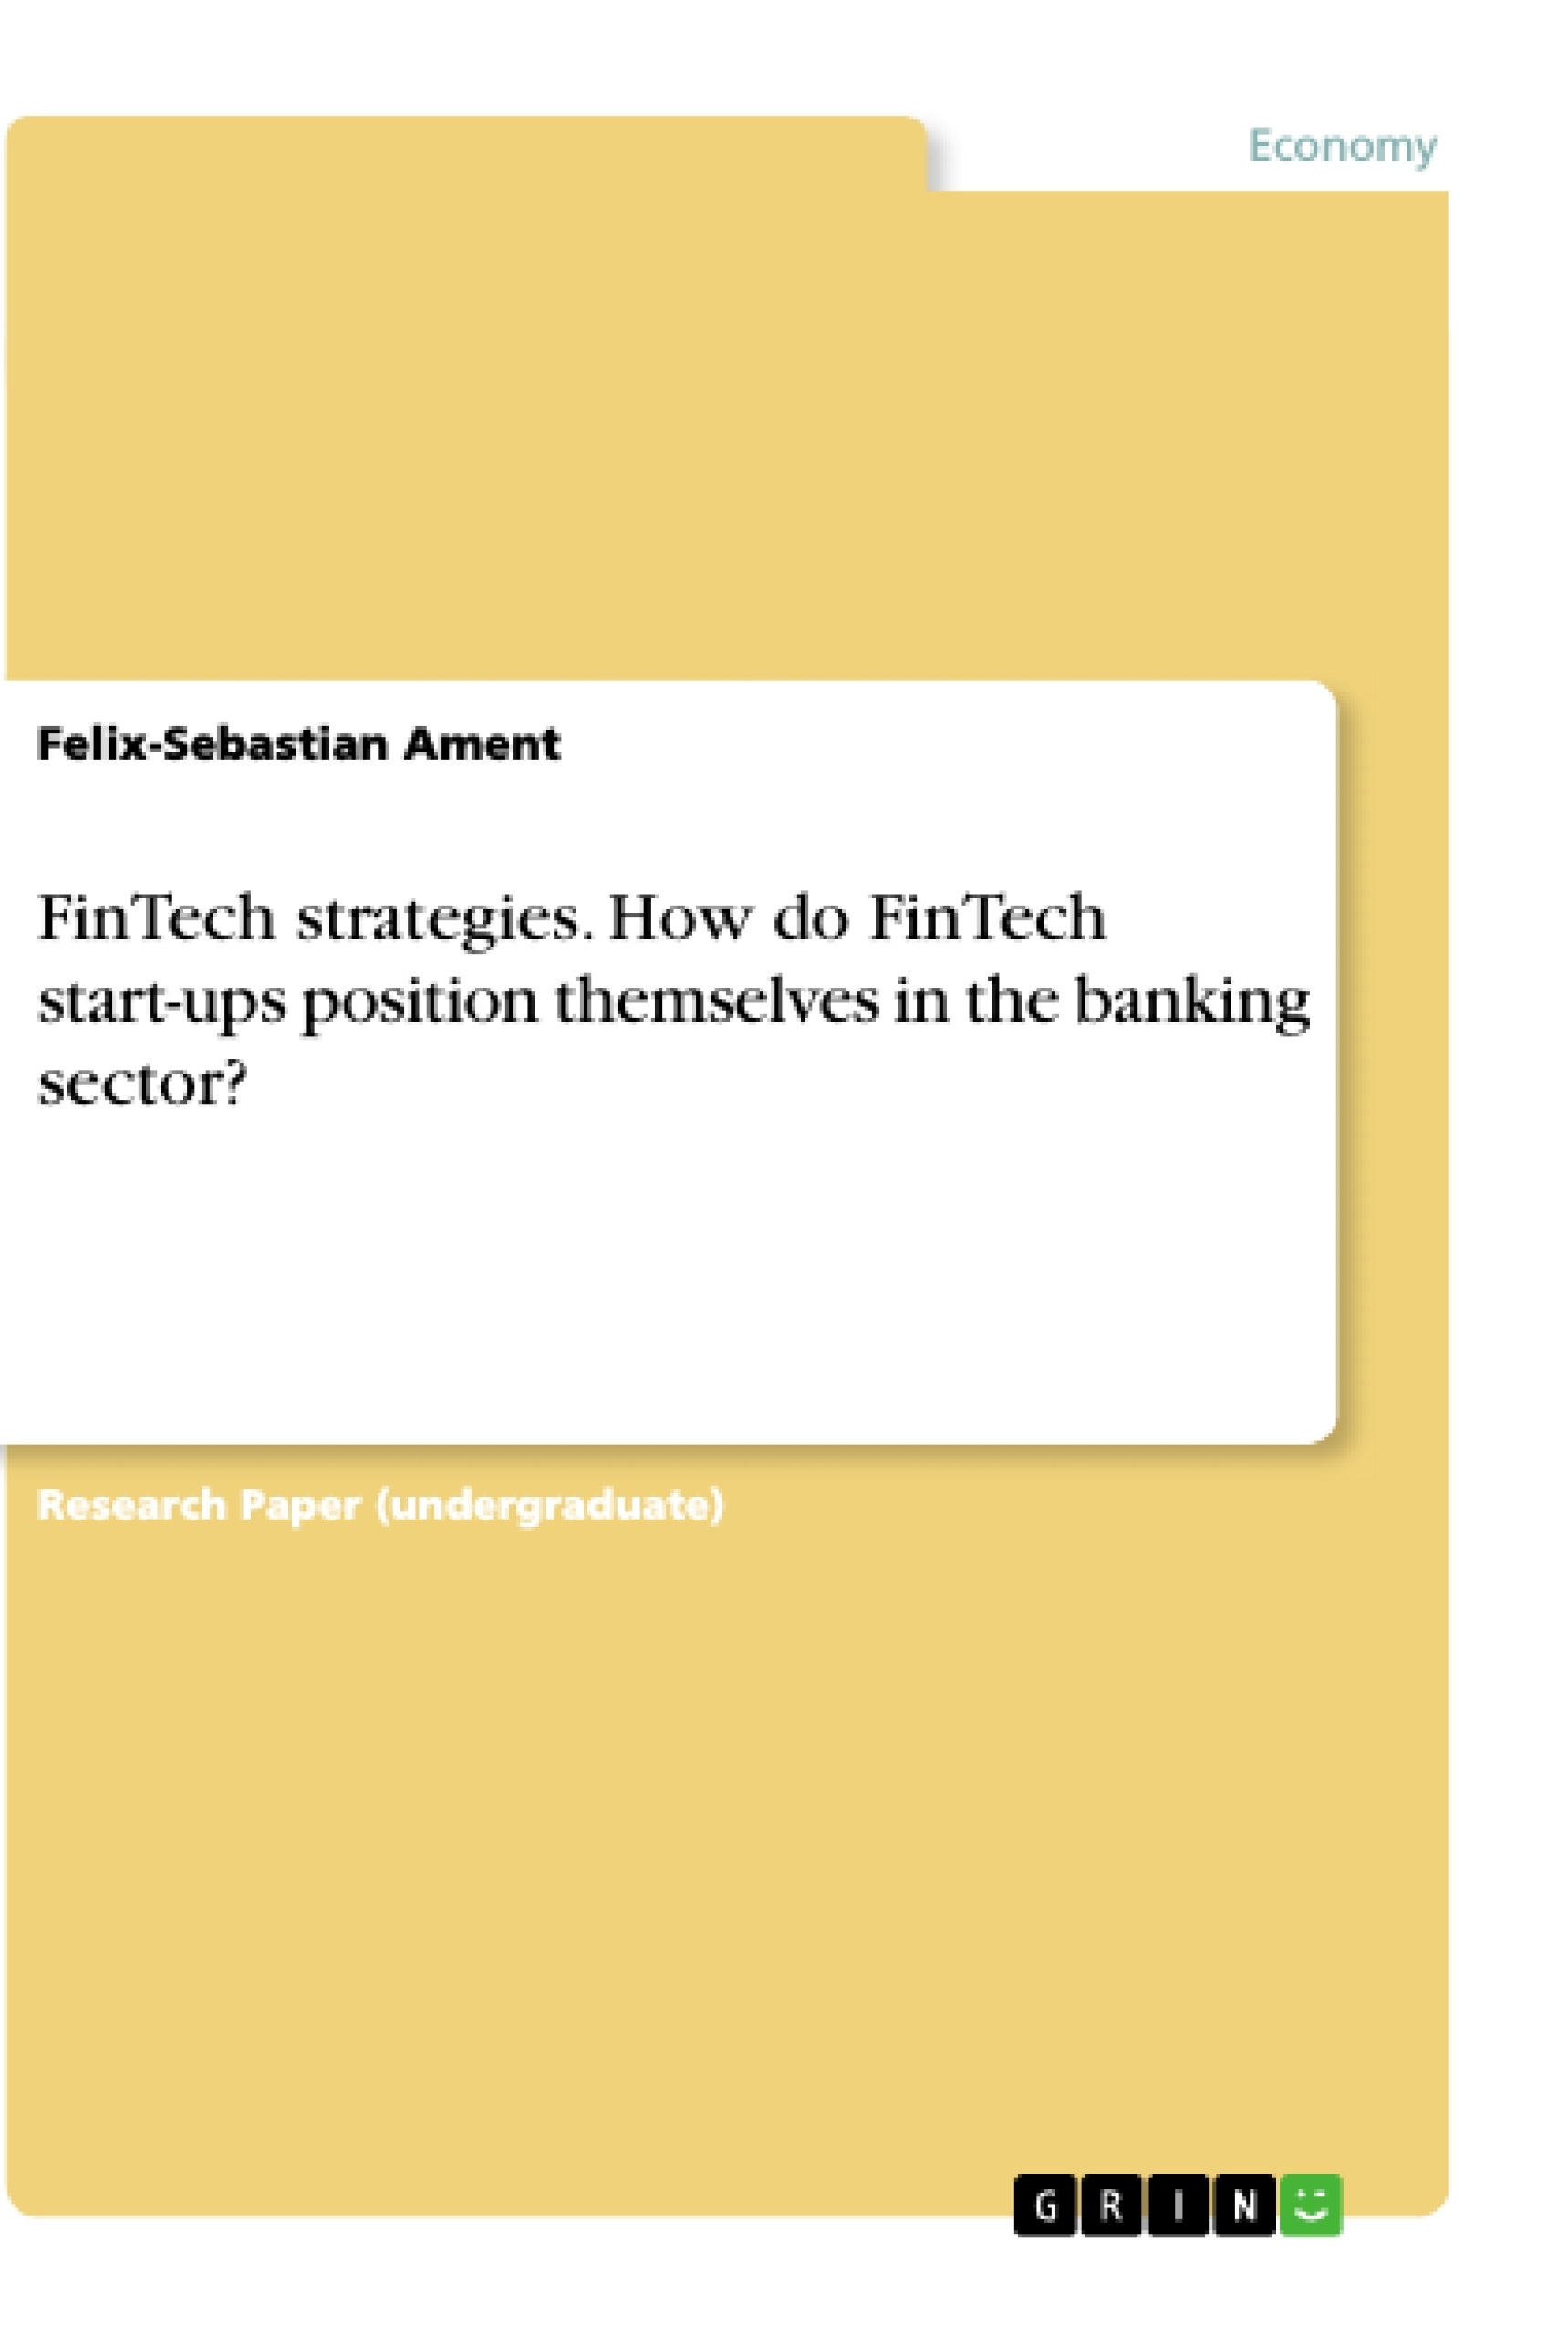 Title: FinTech strategies. How do FinTech start-ups position themselves in the banking sector?